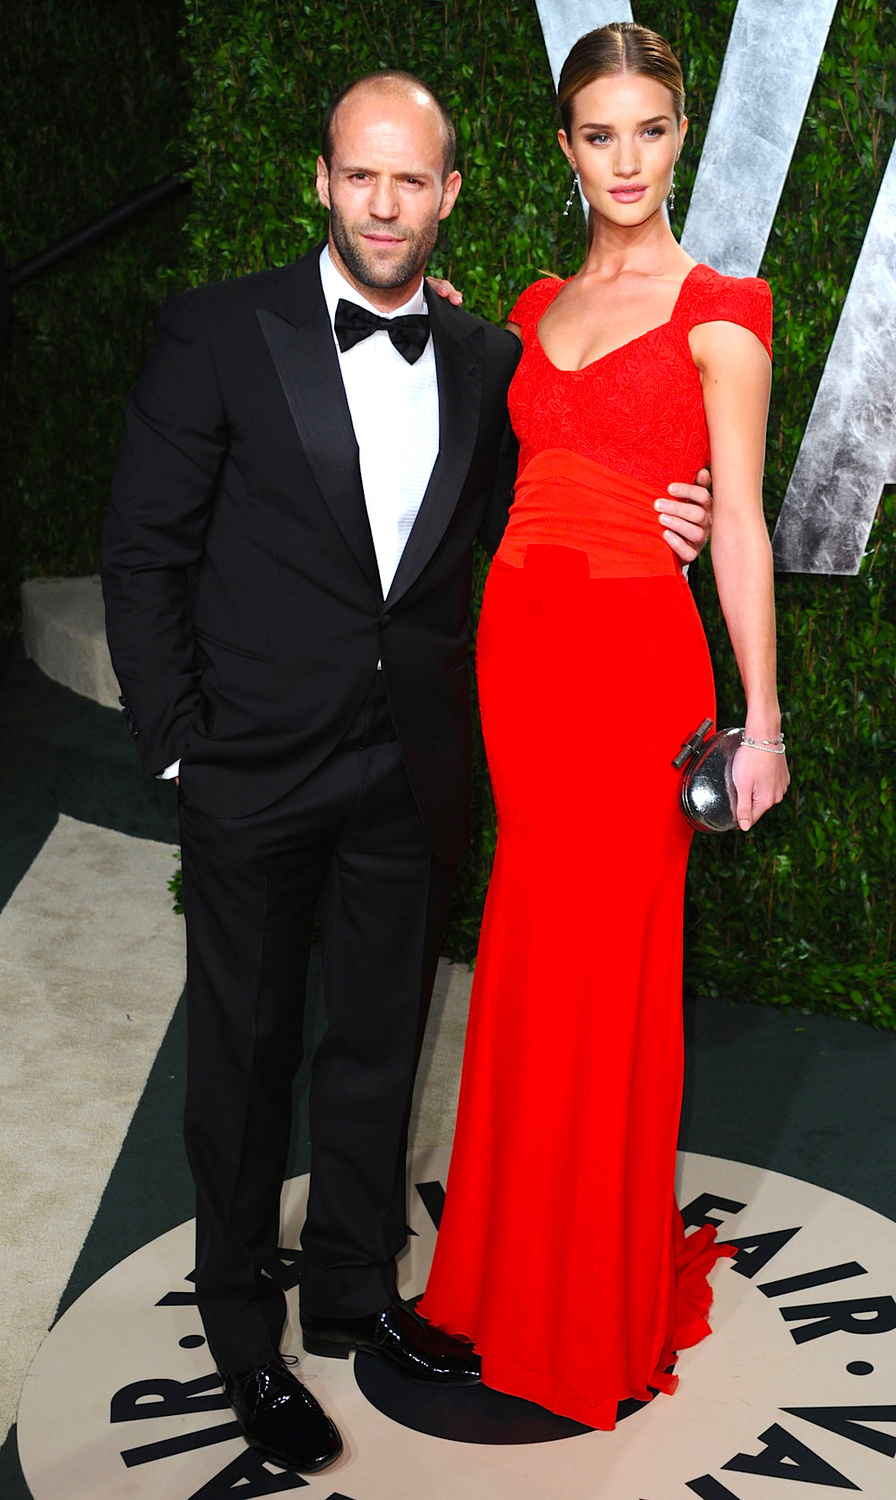 WEST HOLLYWOOD, CA - FEBRUARY 26: Actor Jason Statham (L) and actress Rosie Huntington-Whiteley arrives at the 2012 Vanity Fair Oscar Party hosted by Graydon Carter at Sunset Tower on February 26, 2012 in West Hollywood, California. (Photo by Alberto E. Rodriguez/Getty Images)